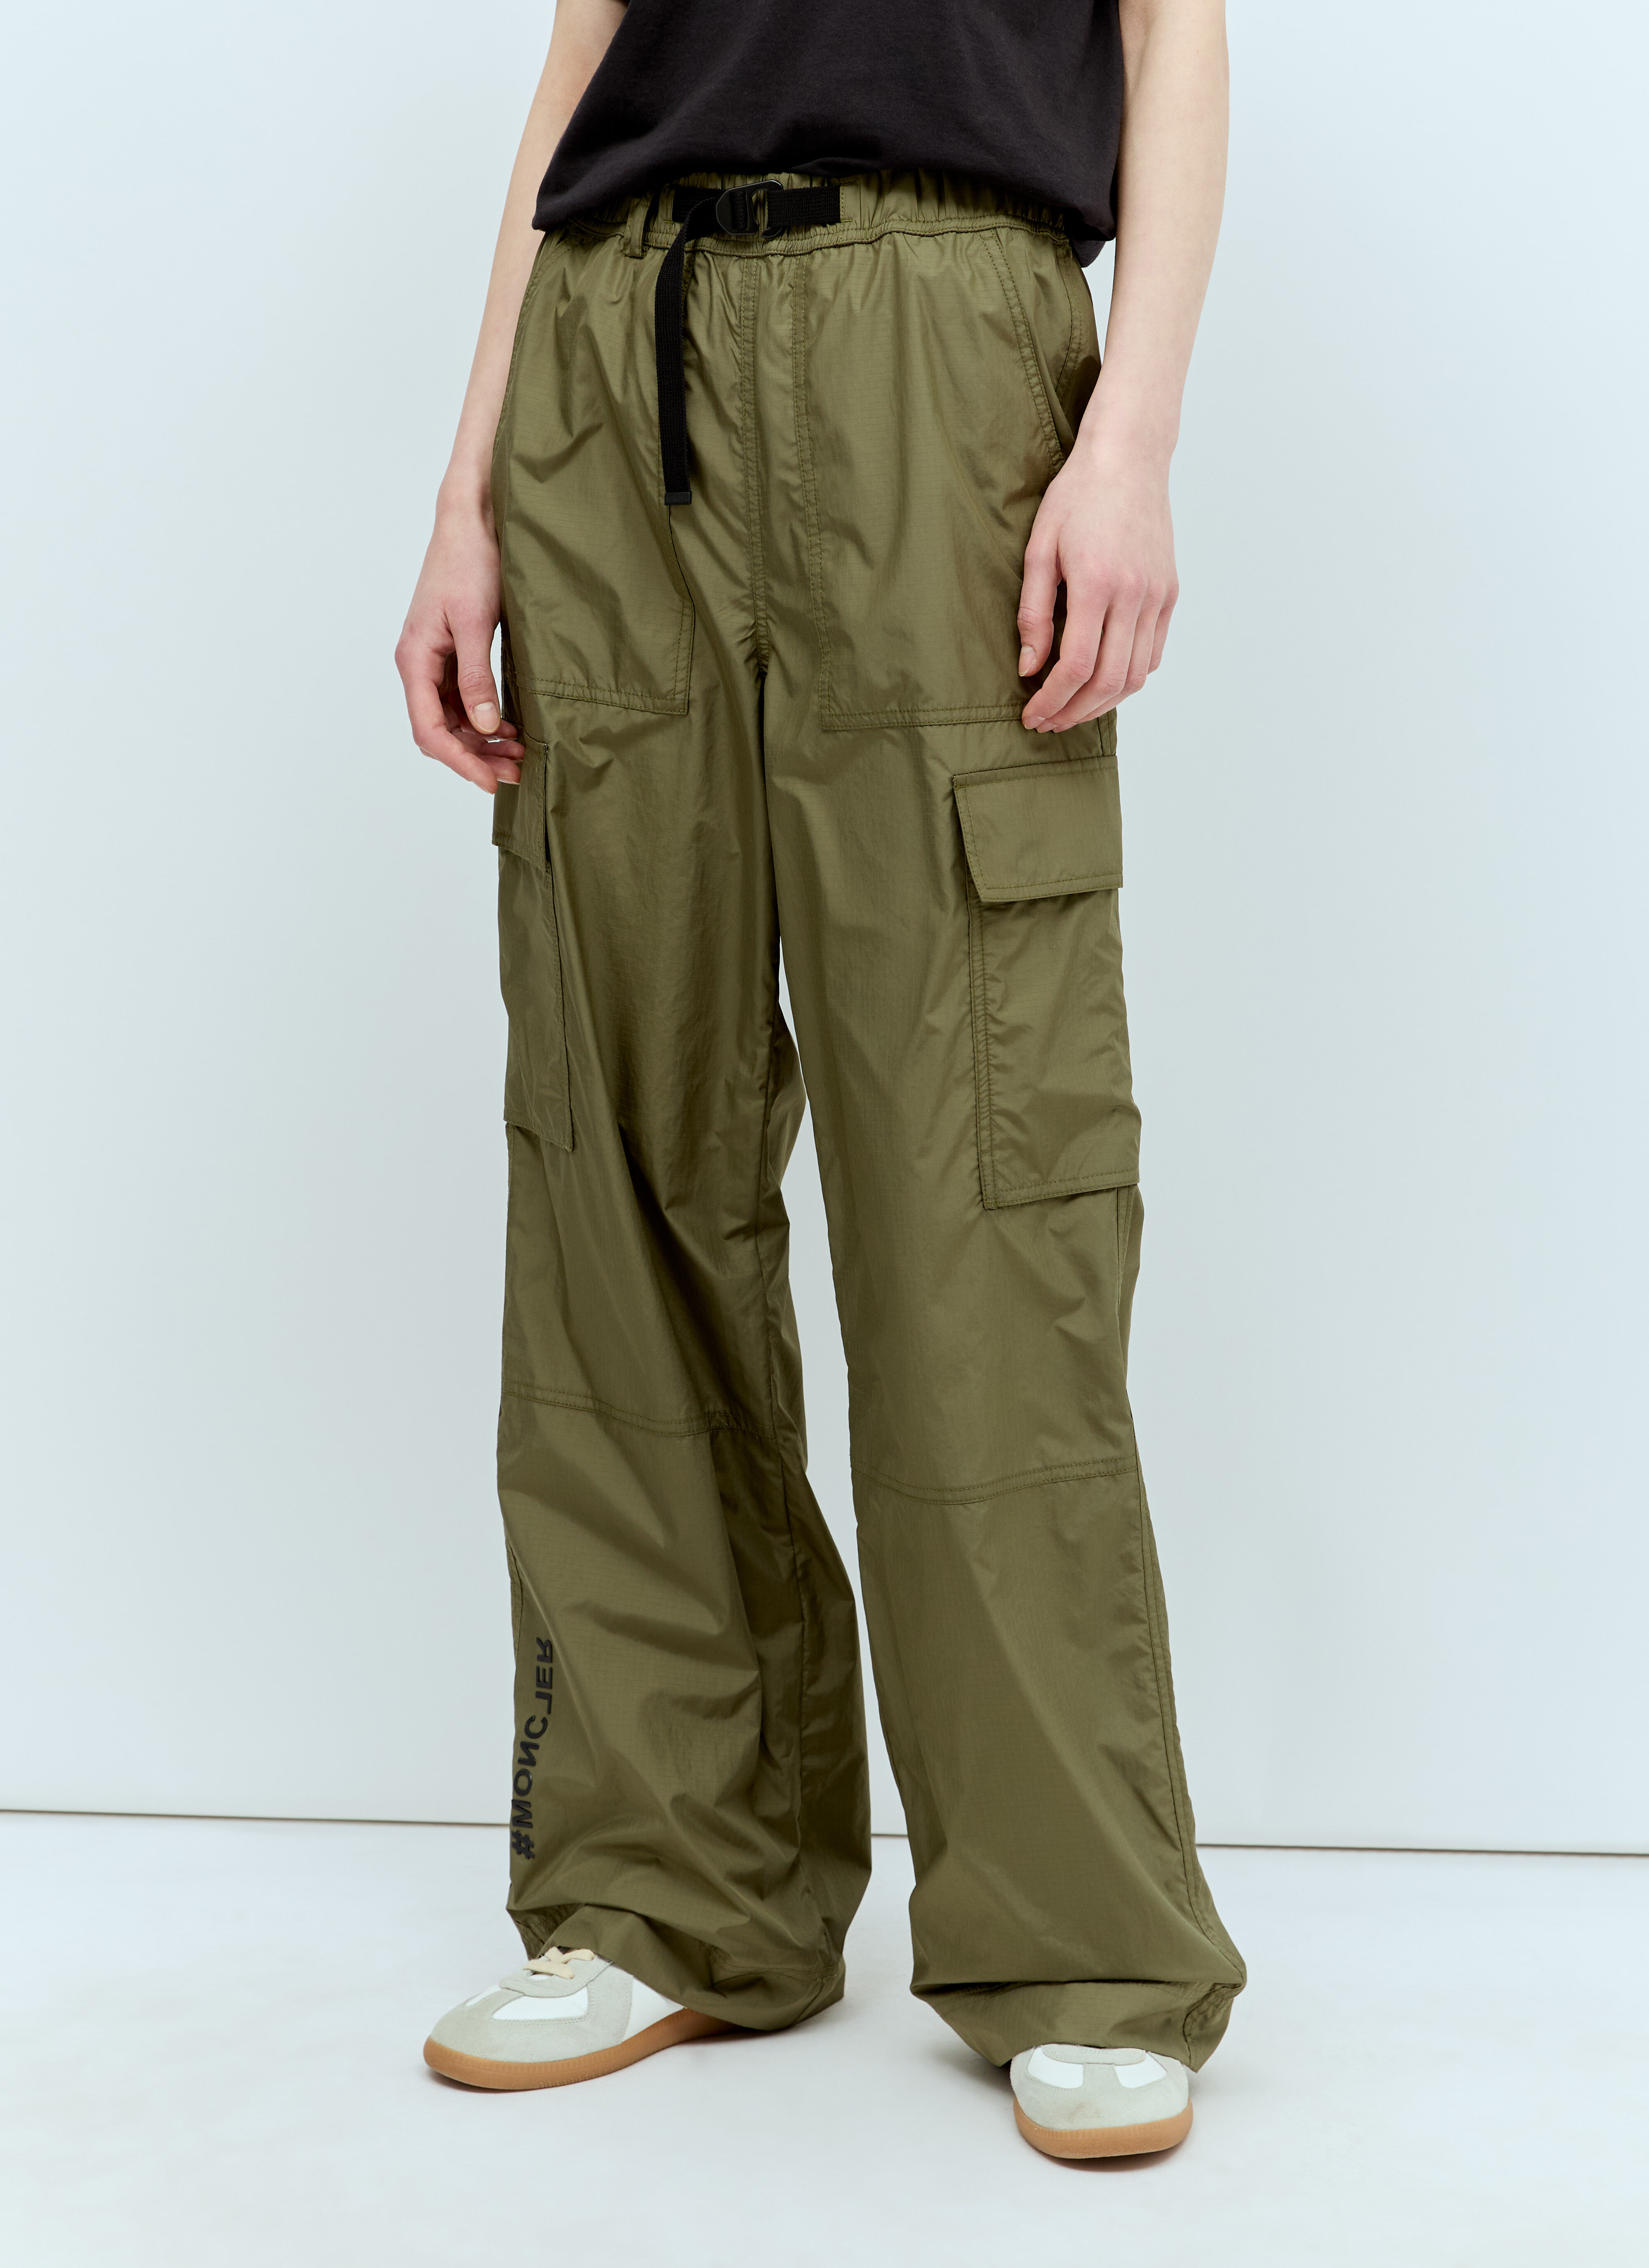 TOTEME Ripstop Cargo Pants Off White tot0257019